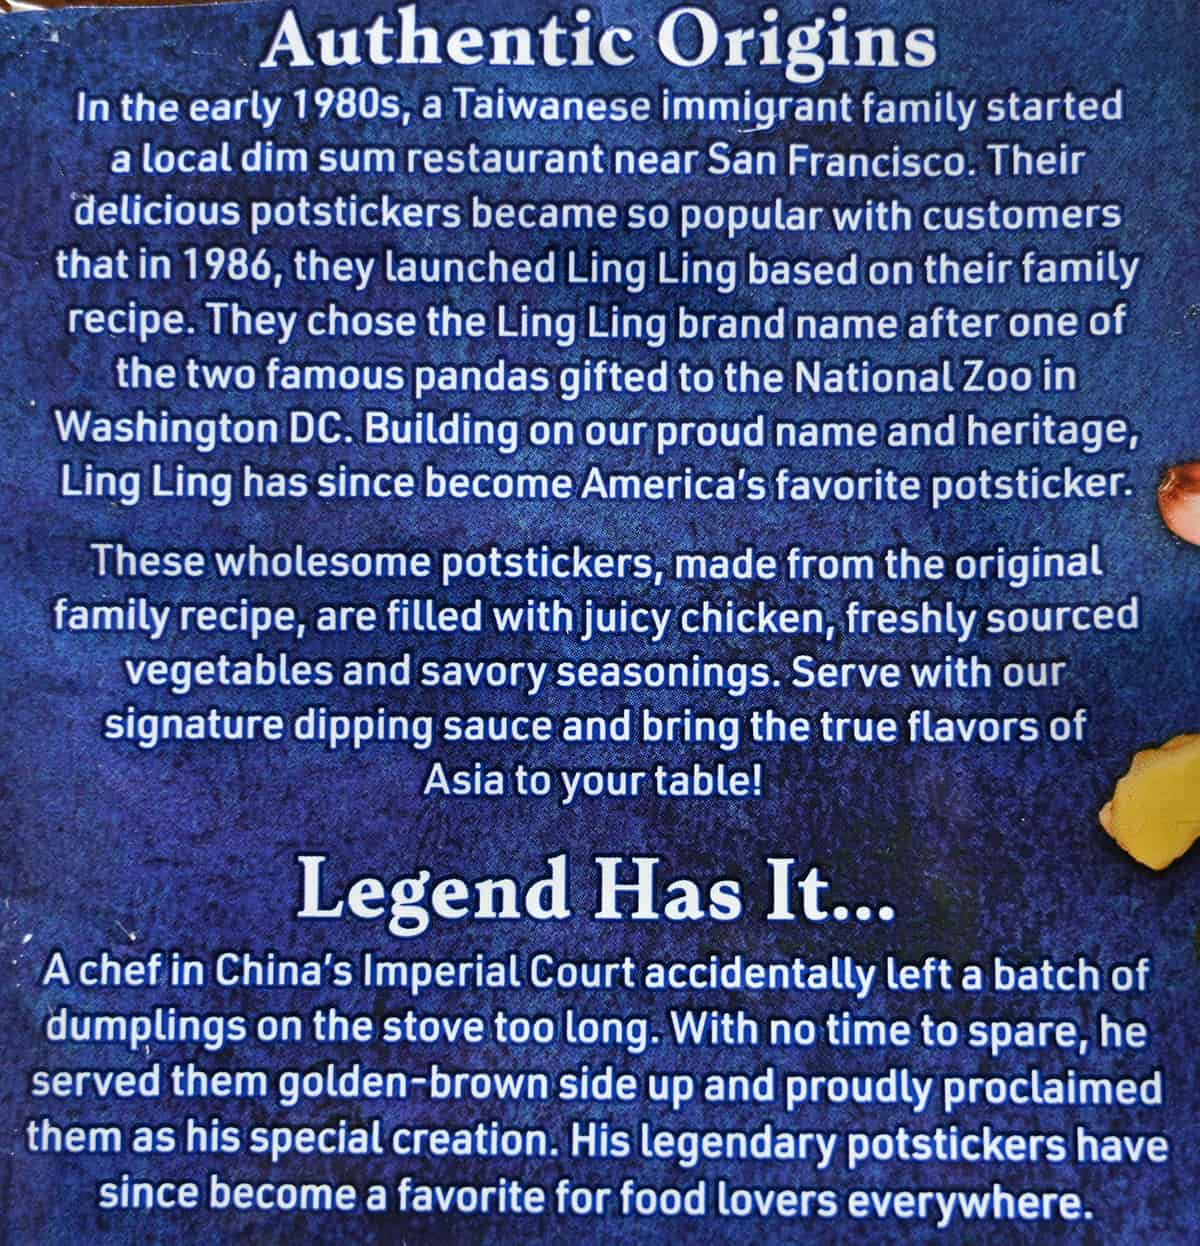 Closeup image of the company and brand description and story from the back of the bag.